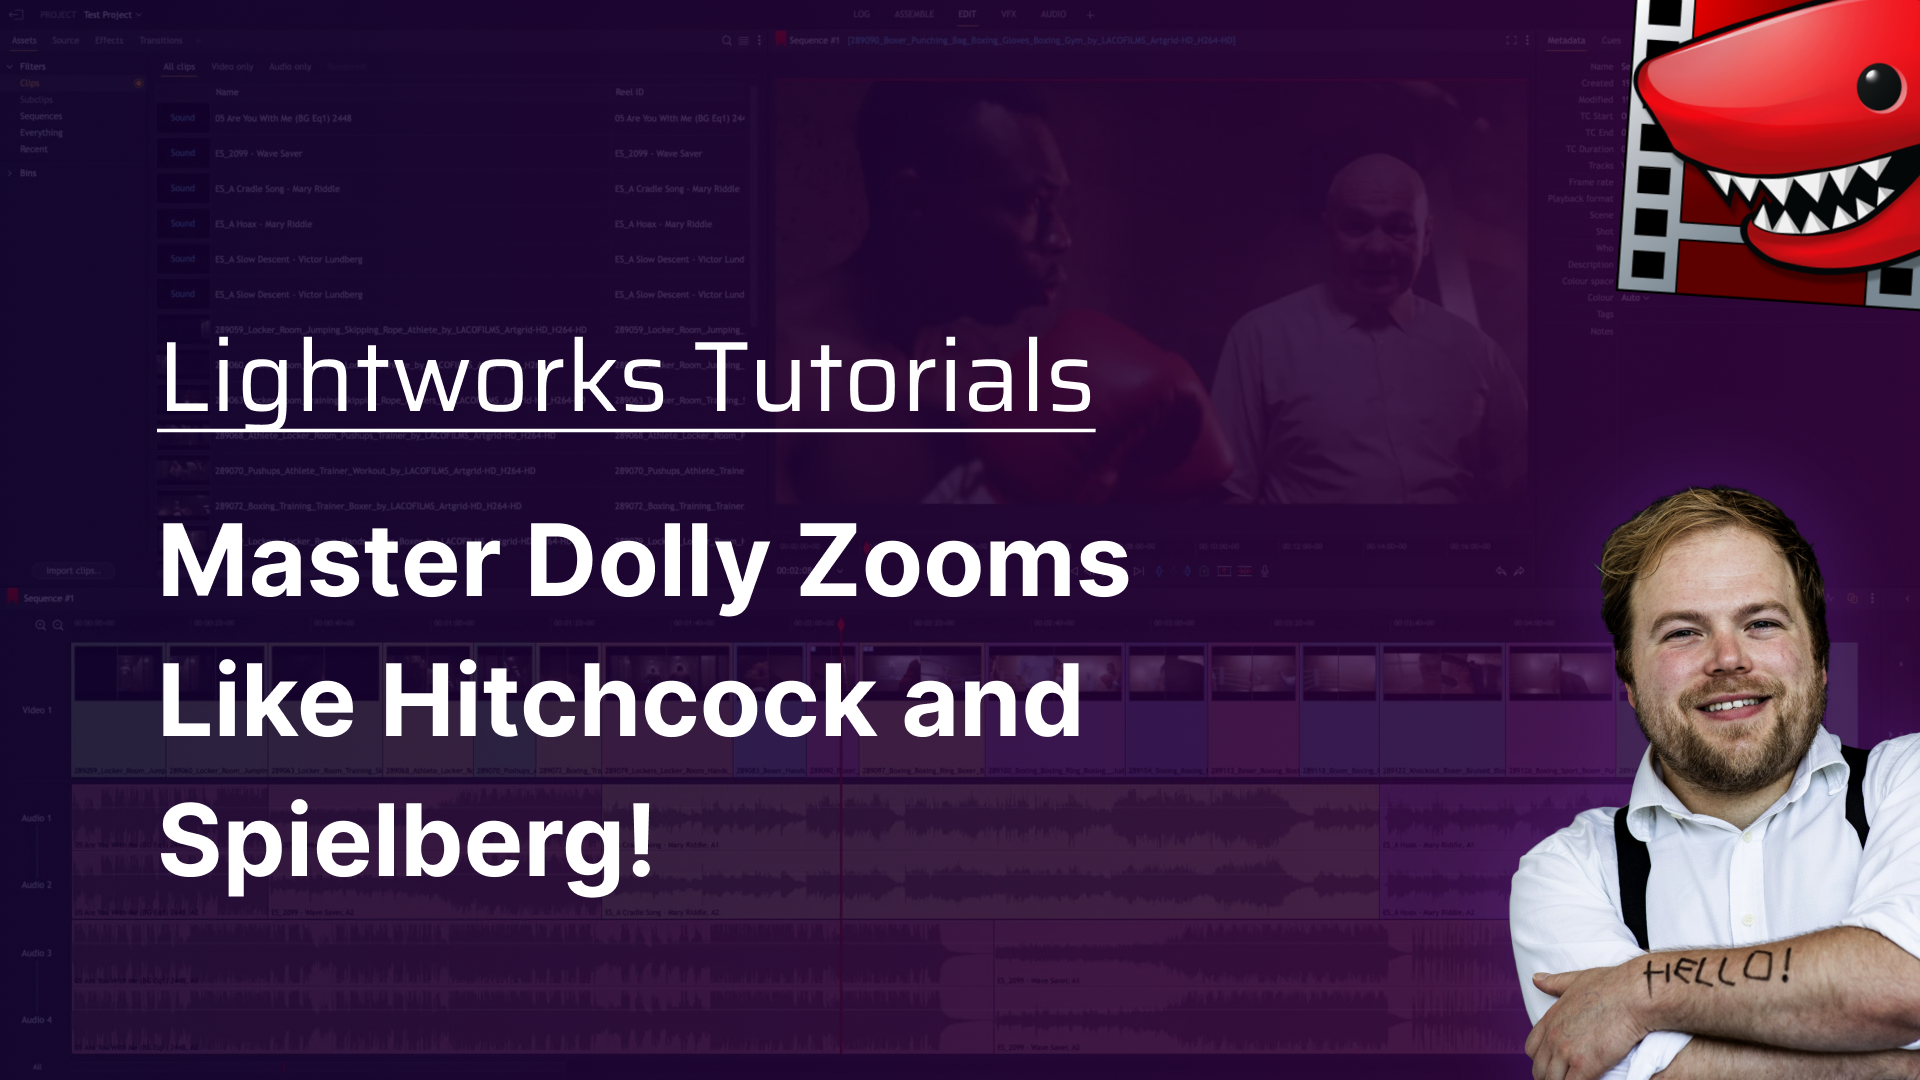 A title card for Master Dolly Zooms Like Hitchcock and Spielberg! A Lightworks Tutorial